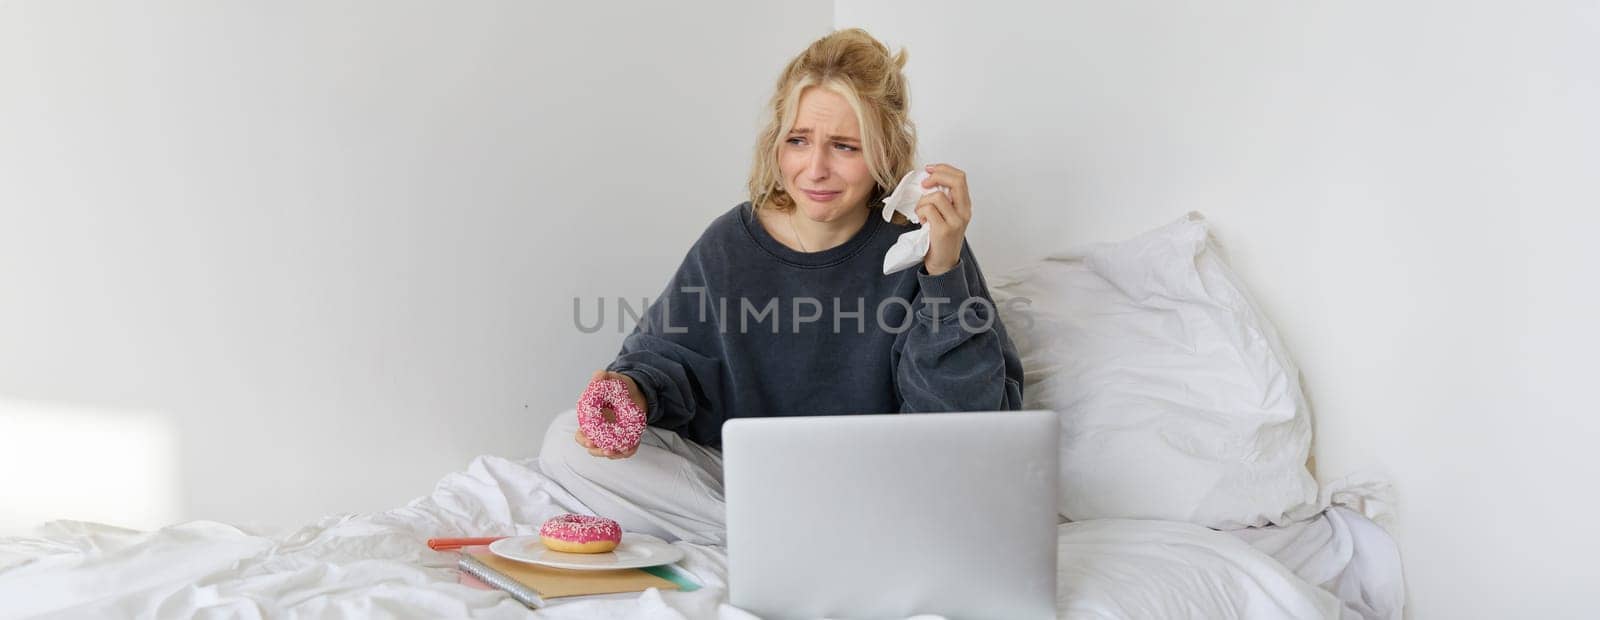 Portrait of woman sitting on a bed with laptop, eating doughnut and crying from sad movie scene by Benzoix